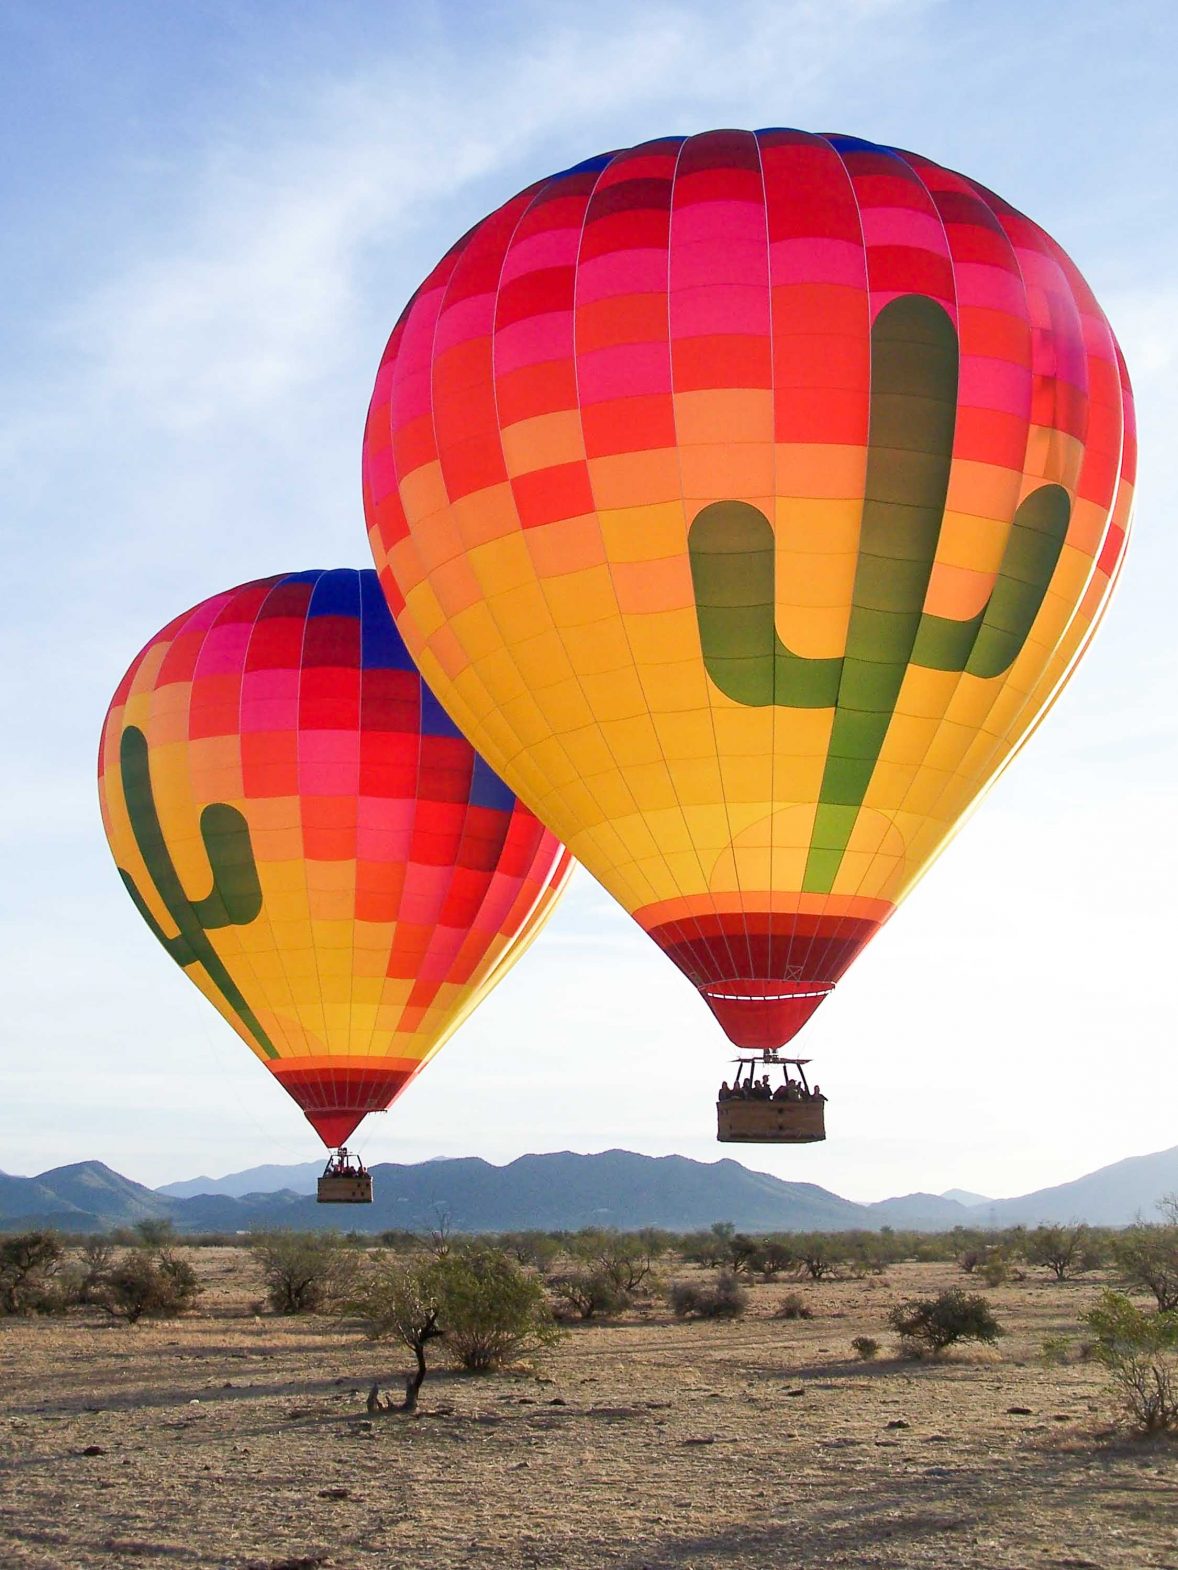 Two hot air balloons fly above a dry landscape.